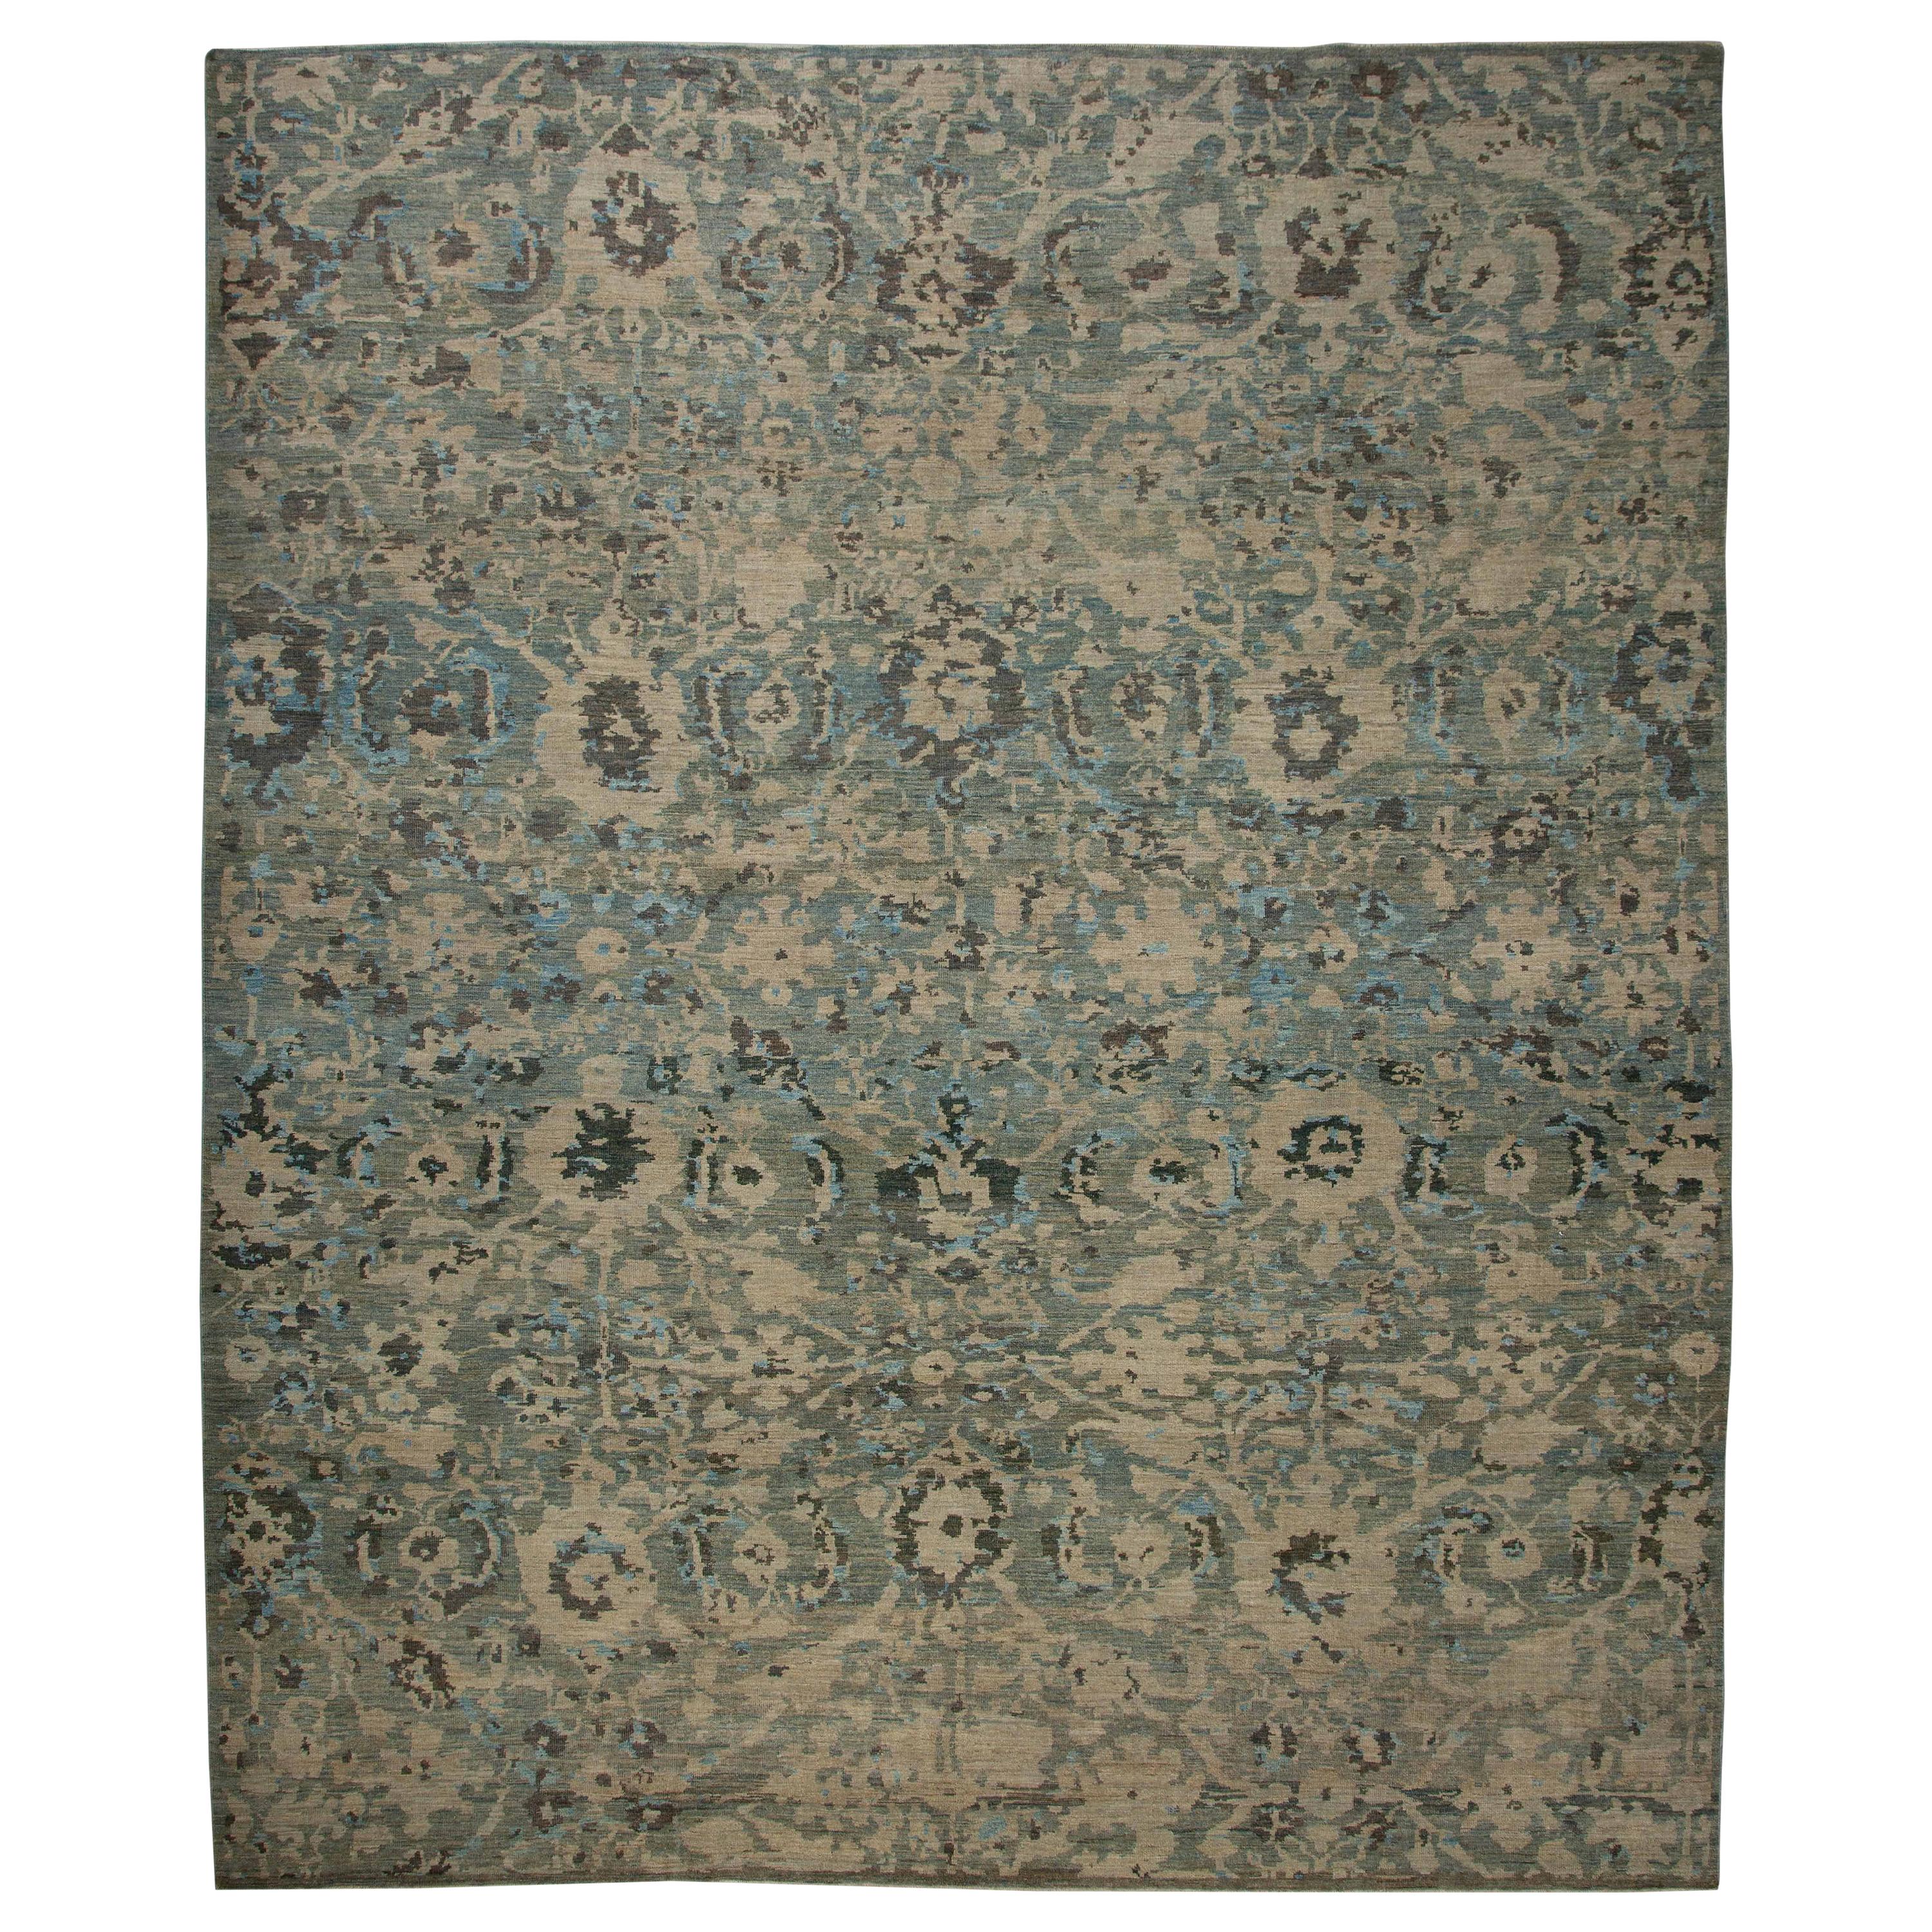 Modern Turkish Sultanabad Rug with Allover Floral Design and No Borders